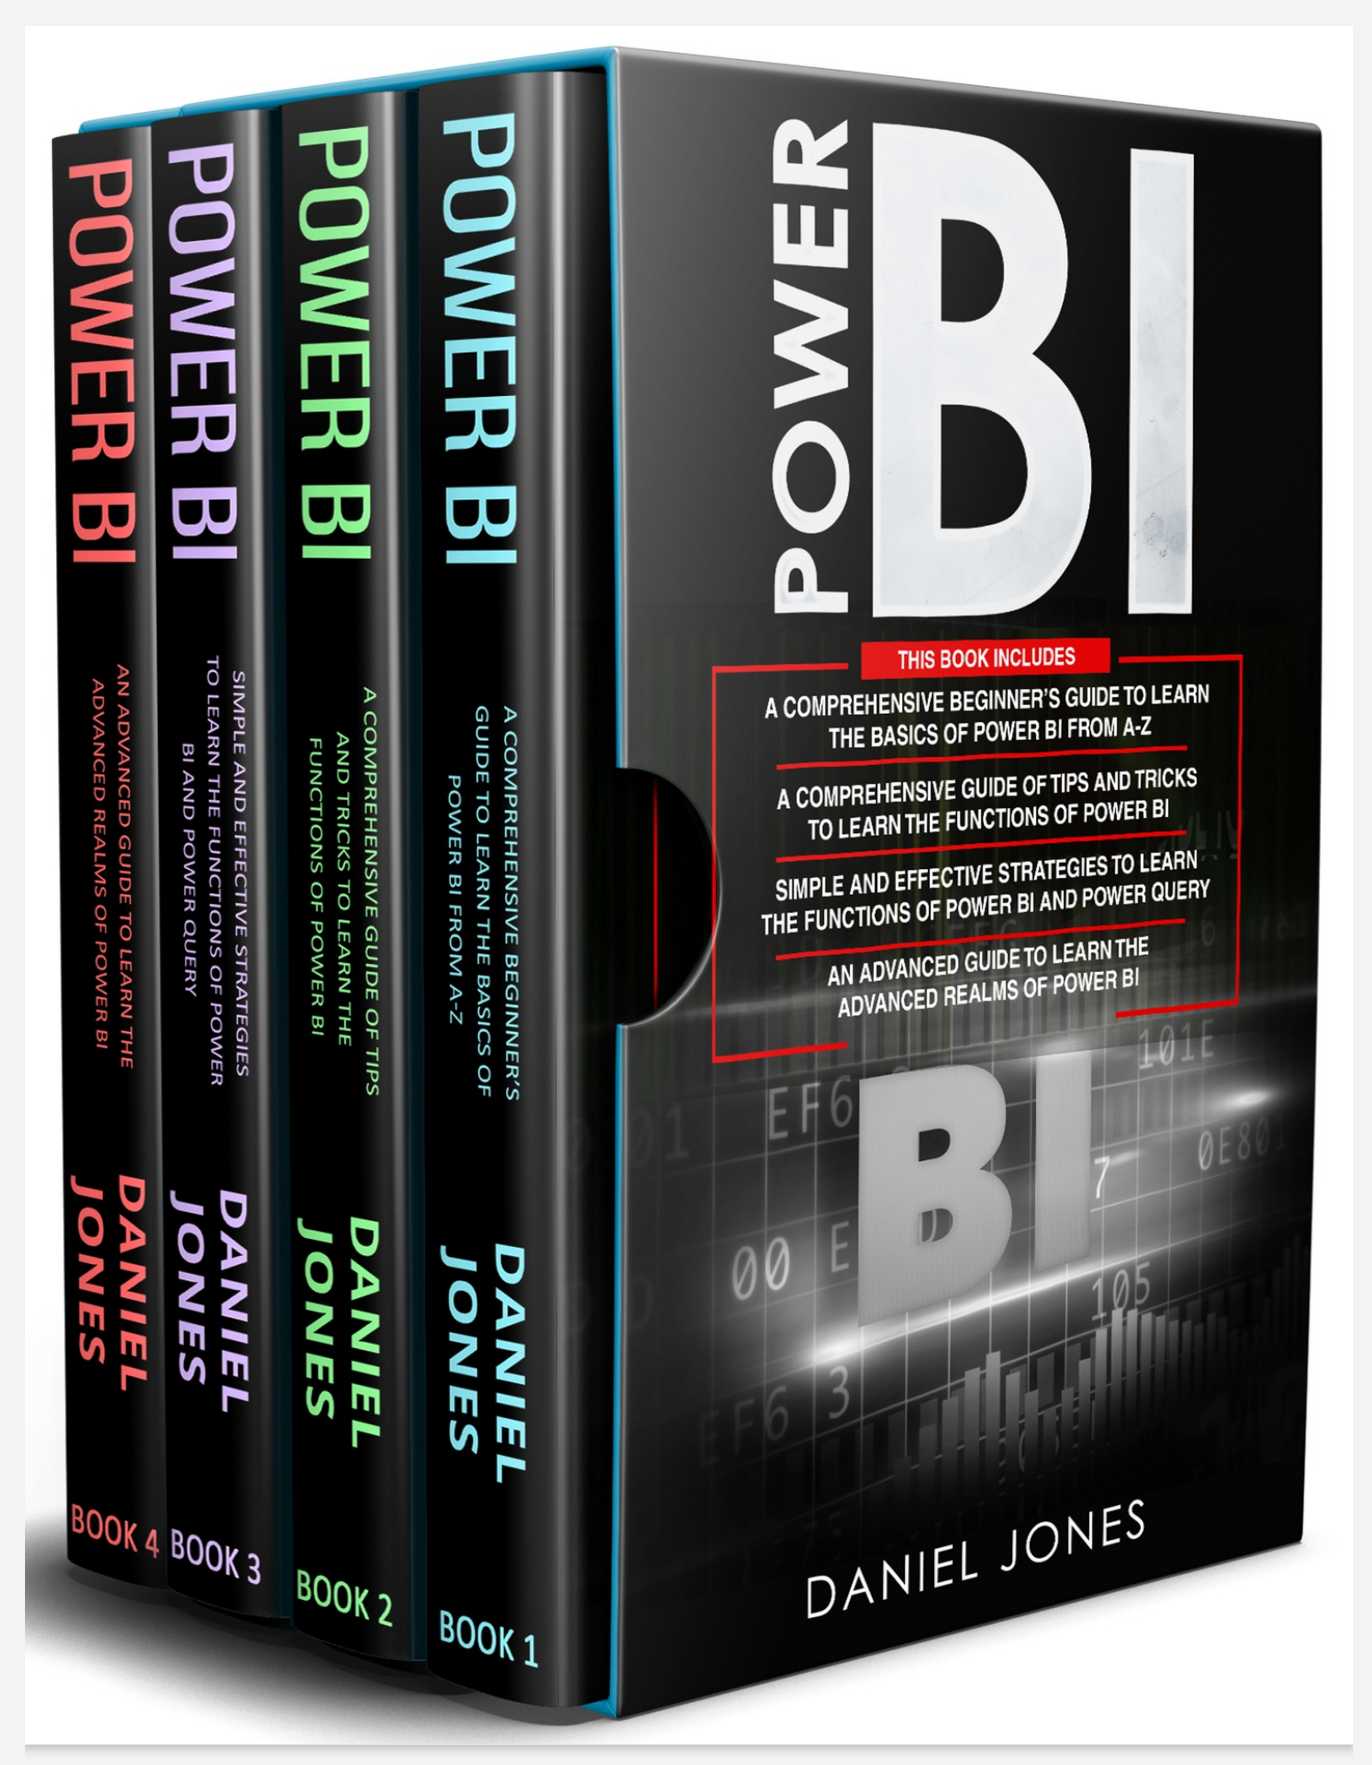 Power BI: 4 in 1- Beginner’s Guide+ Tips and Tricks+ Simple and Effective Strategies to learn Power Bi and Power Query+ An Advanced Guide to Learn the Advanced Realms of Power BI PDF